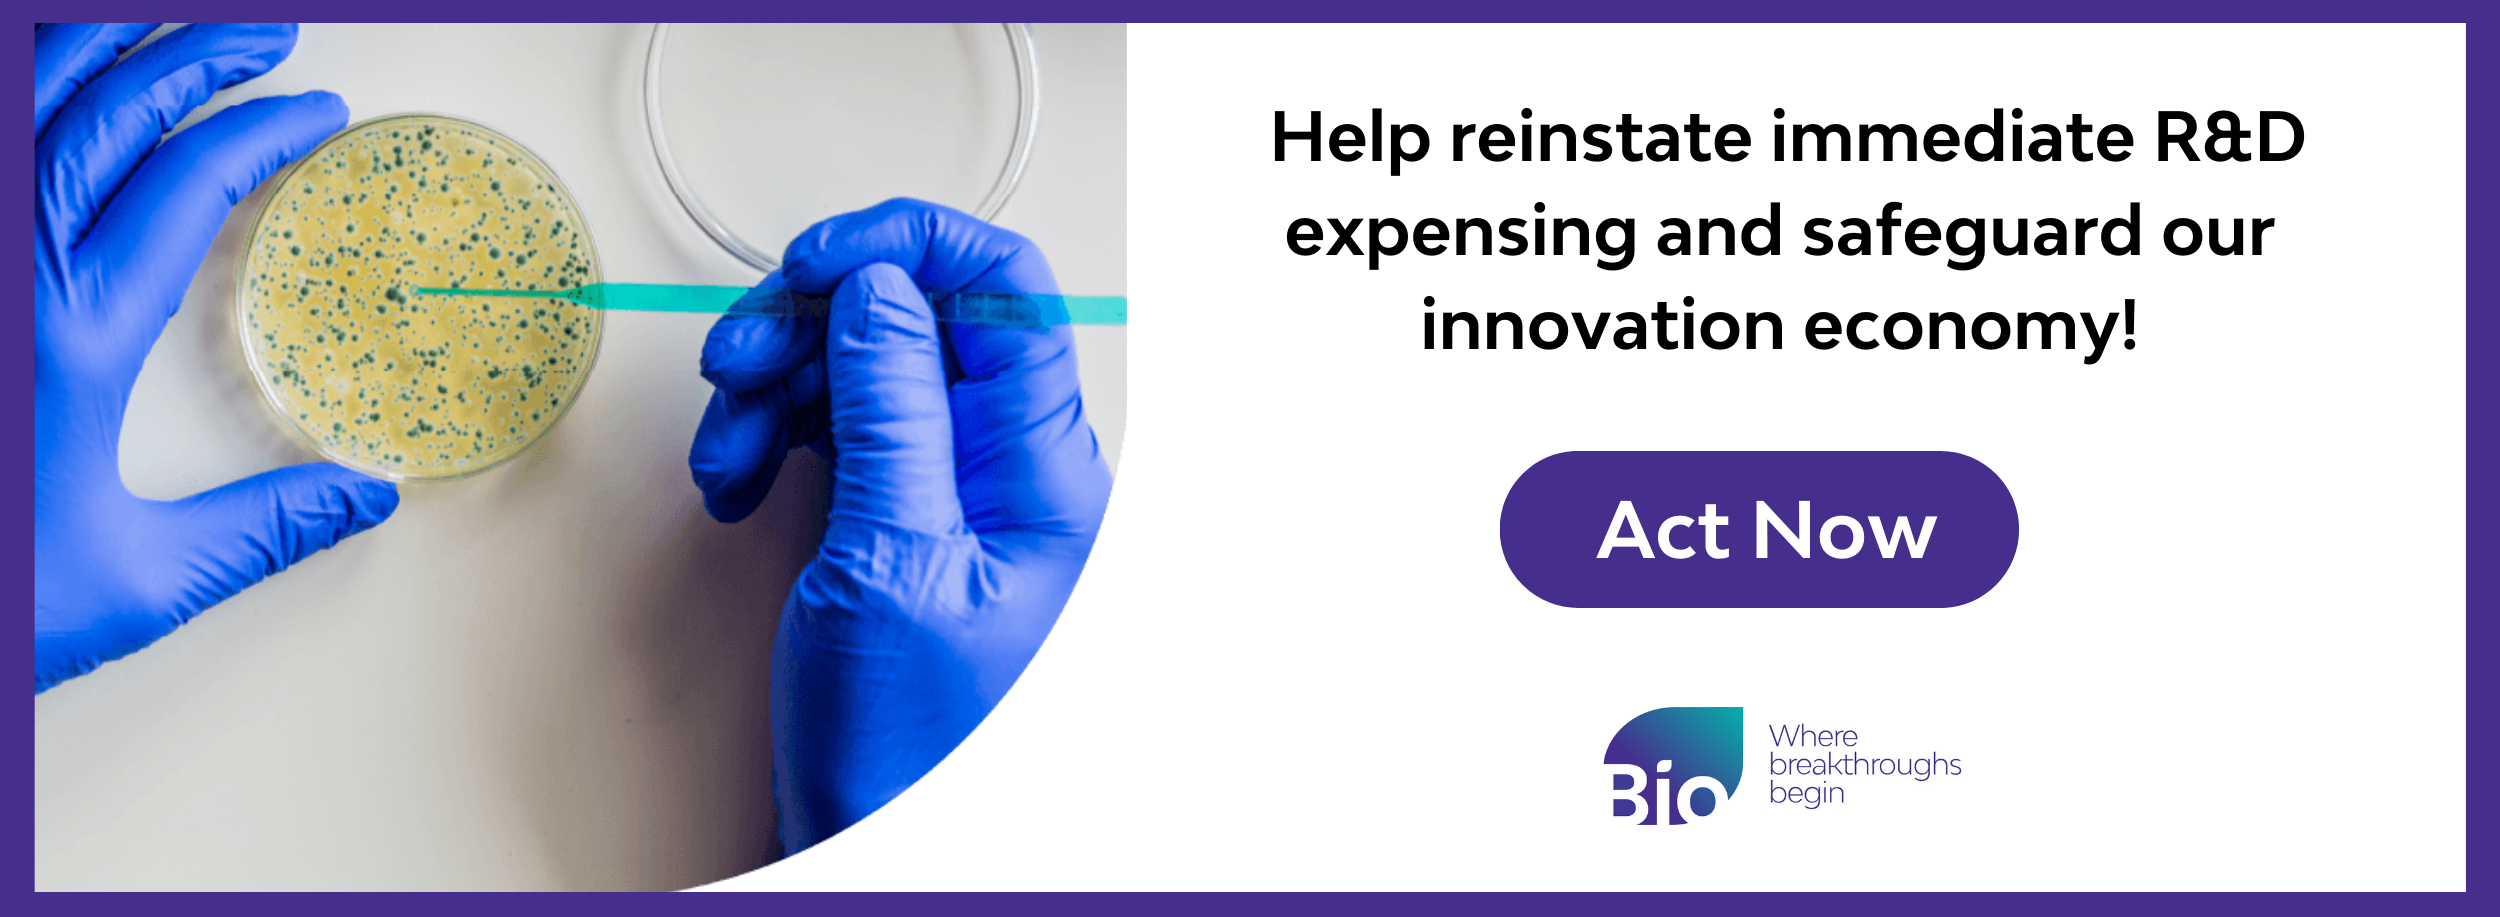 Click to join the BIOAction campaign and urge your lawmakers to reinstate immediate R&D expensing.